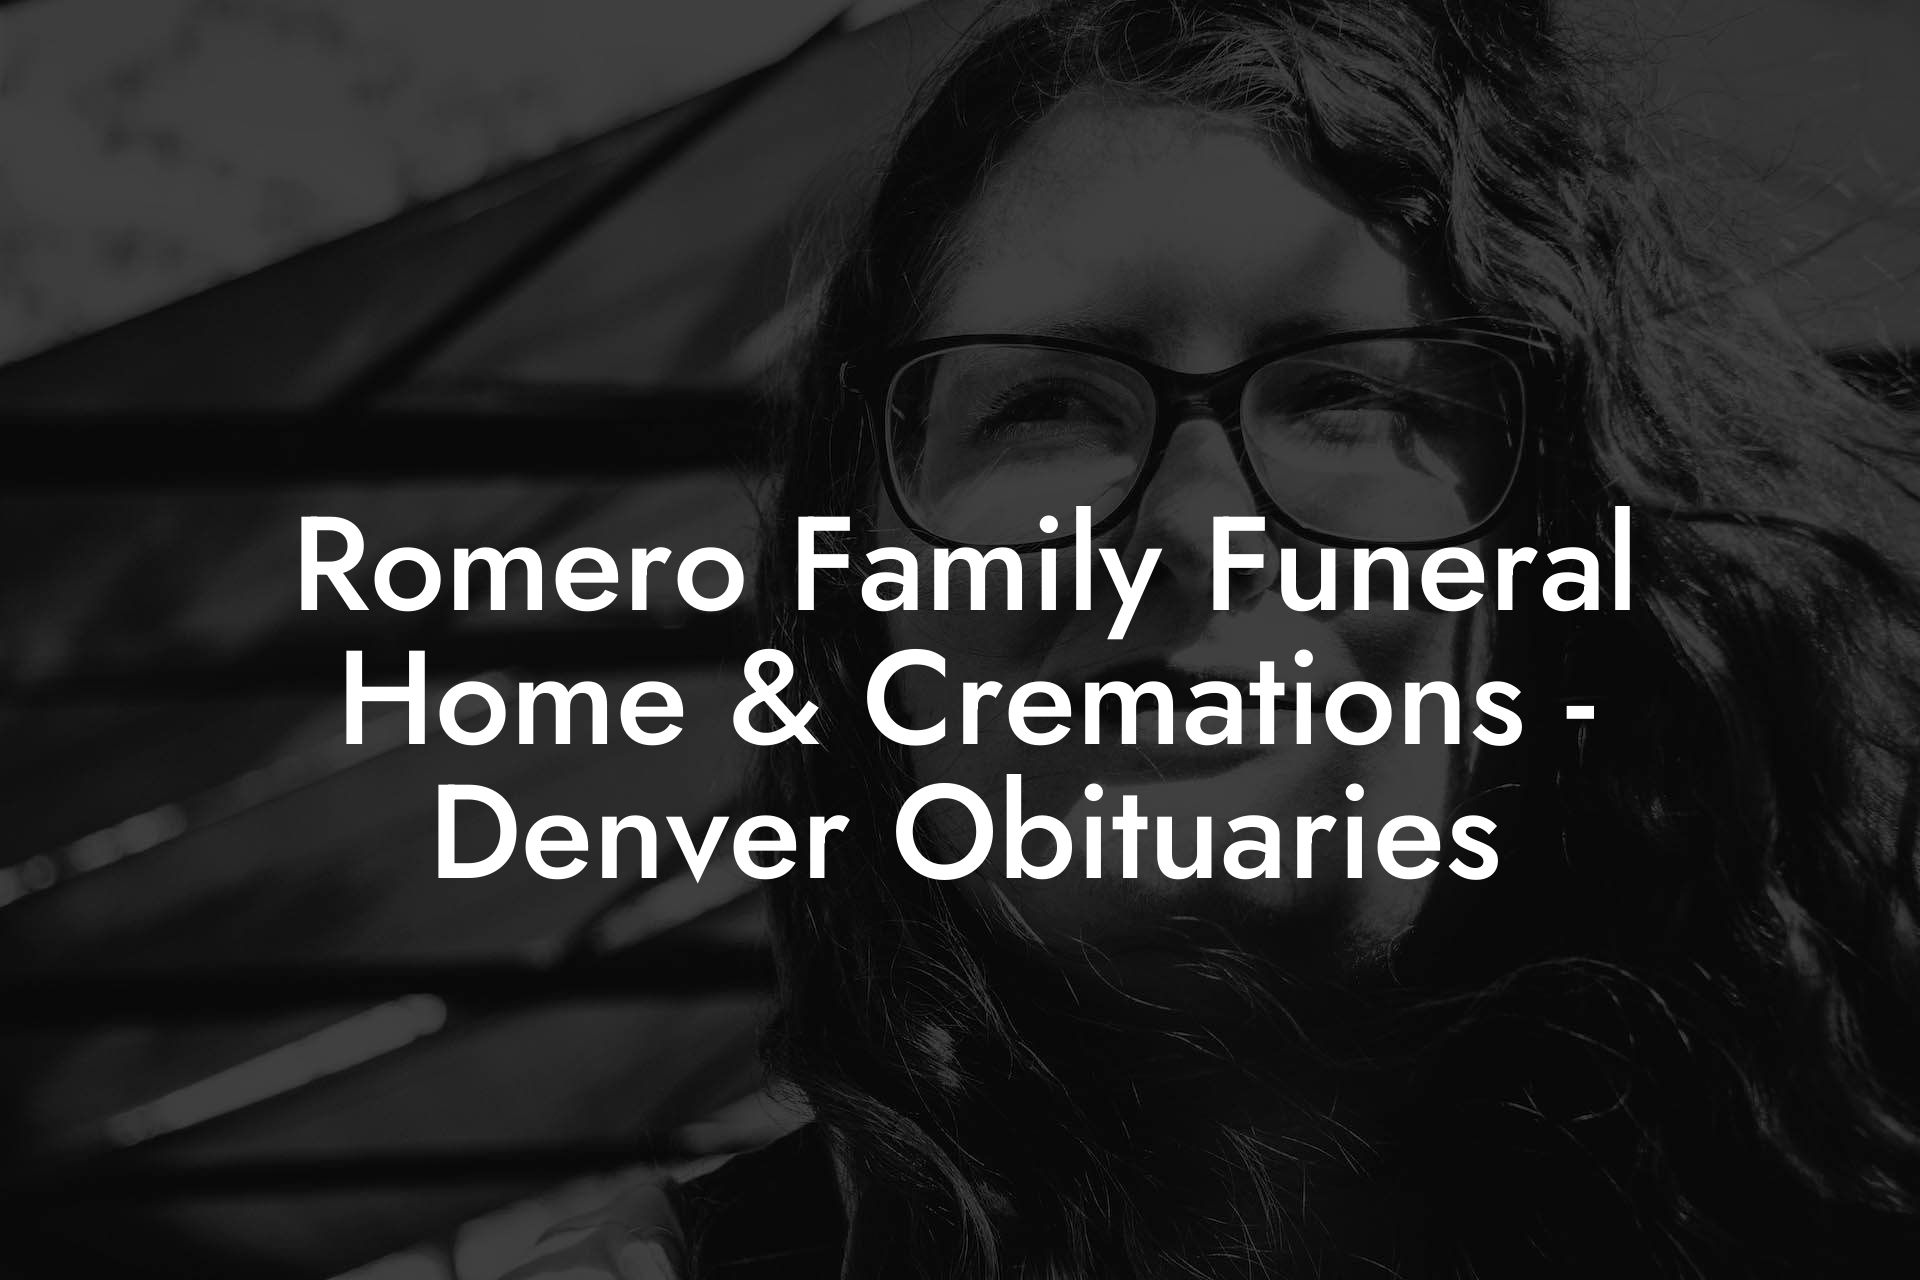 Romero Family Funeral Home & Cremations - Denver Obituaries